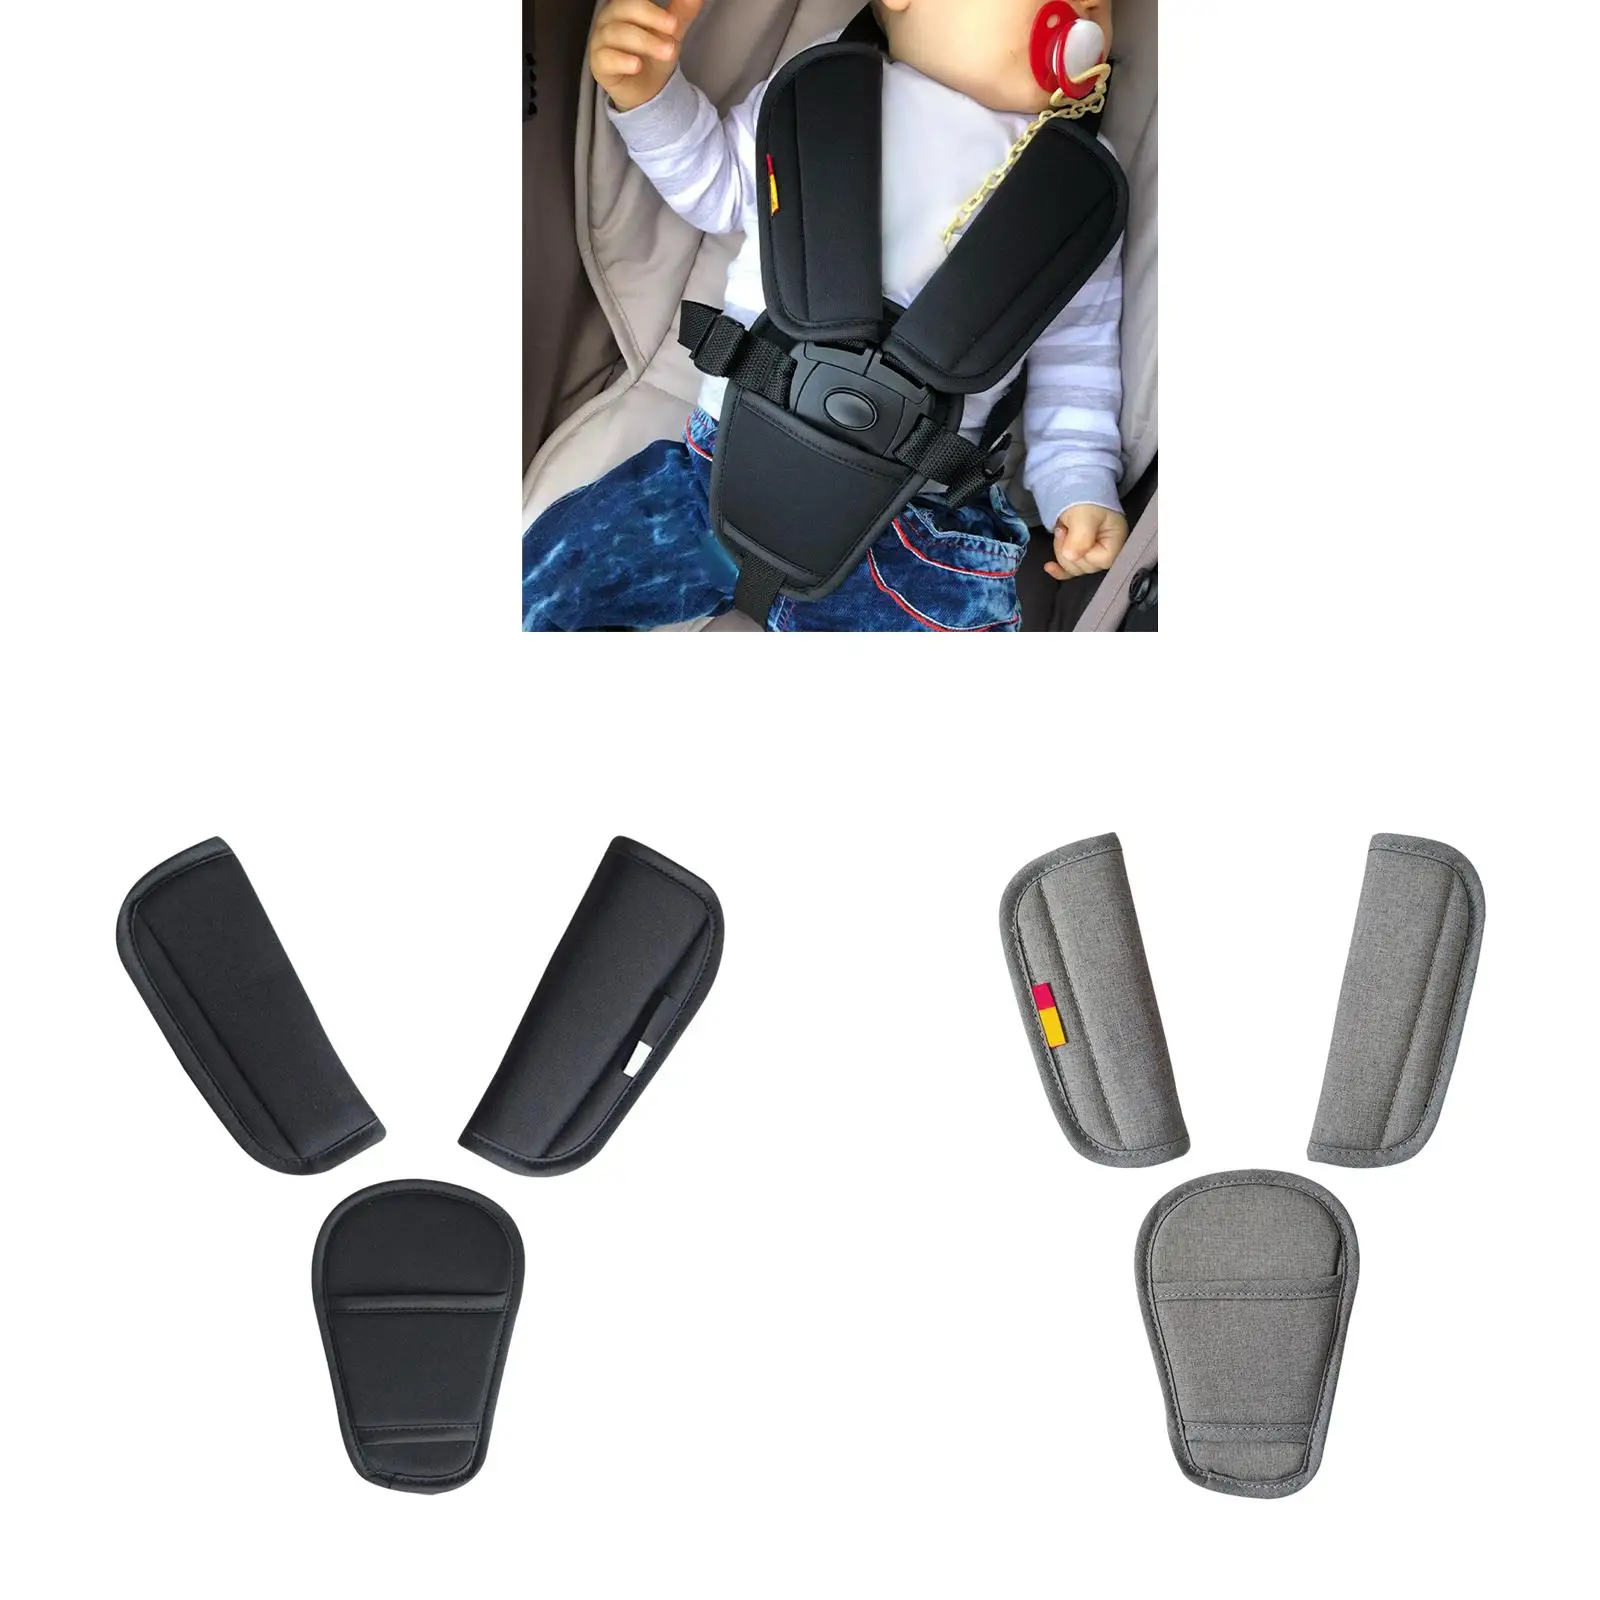 Baby Stroller Shoulder Cover Protector Stroller Accessories Covers Pad Belt Cover for Children